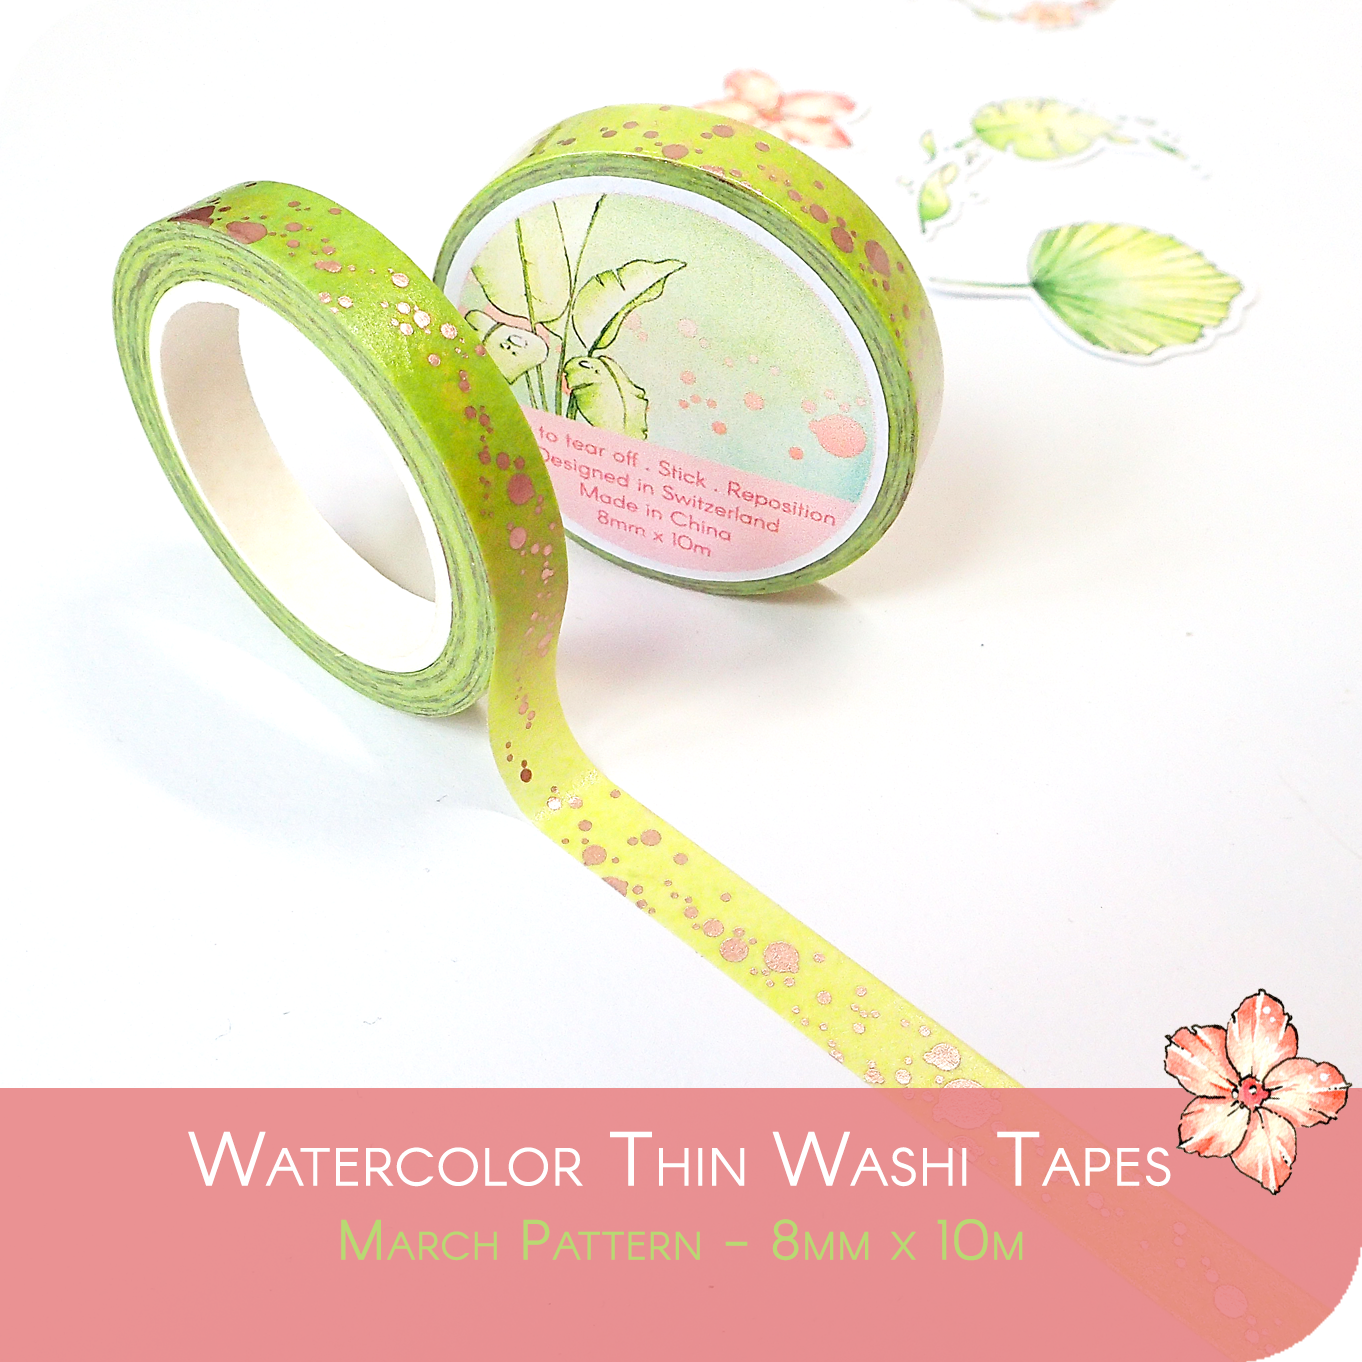 Green Water Drop Watercolor Marble Washi Tape, Splotchy Watercolor Washi  Tape, Bubble Pattern Tape, Stationary Tape BBB SUPPLIES R-GH191 